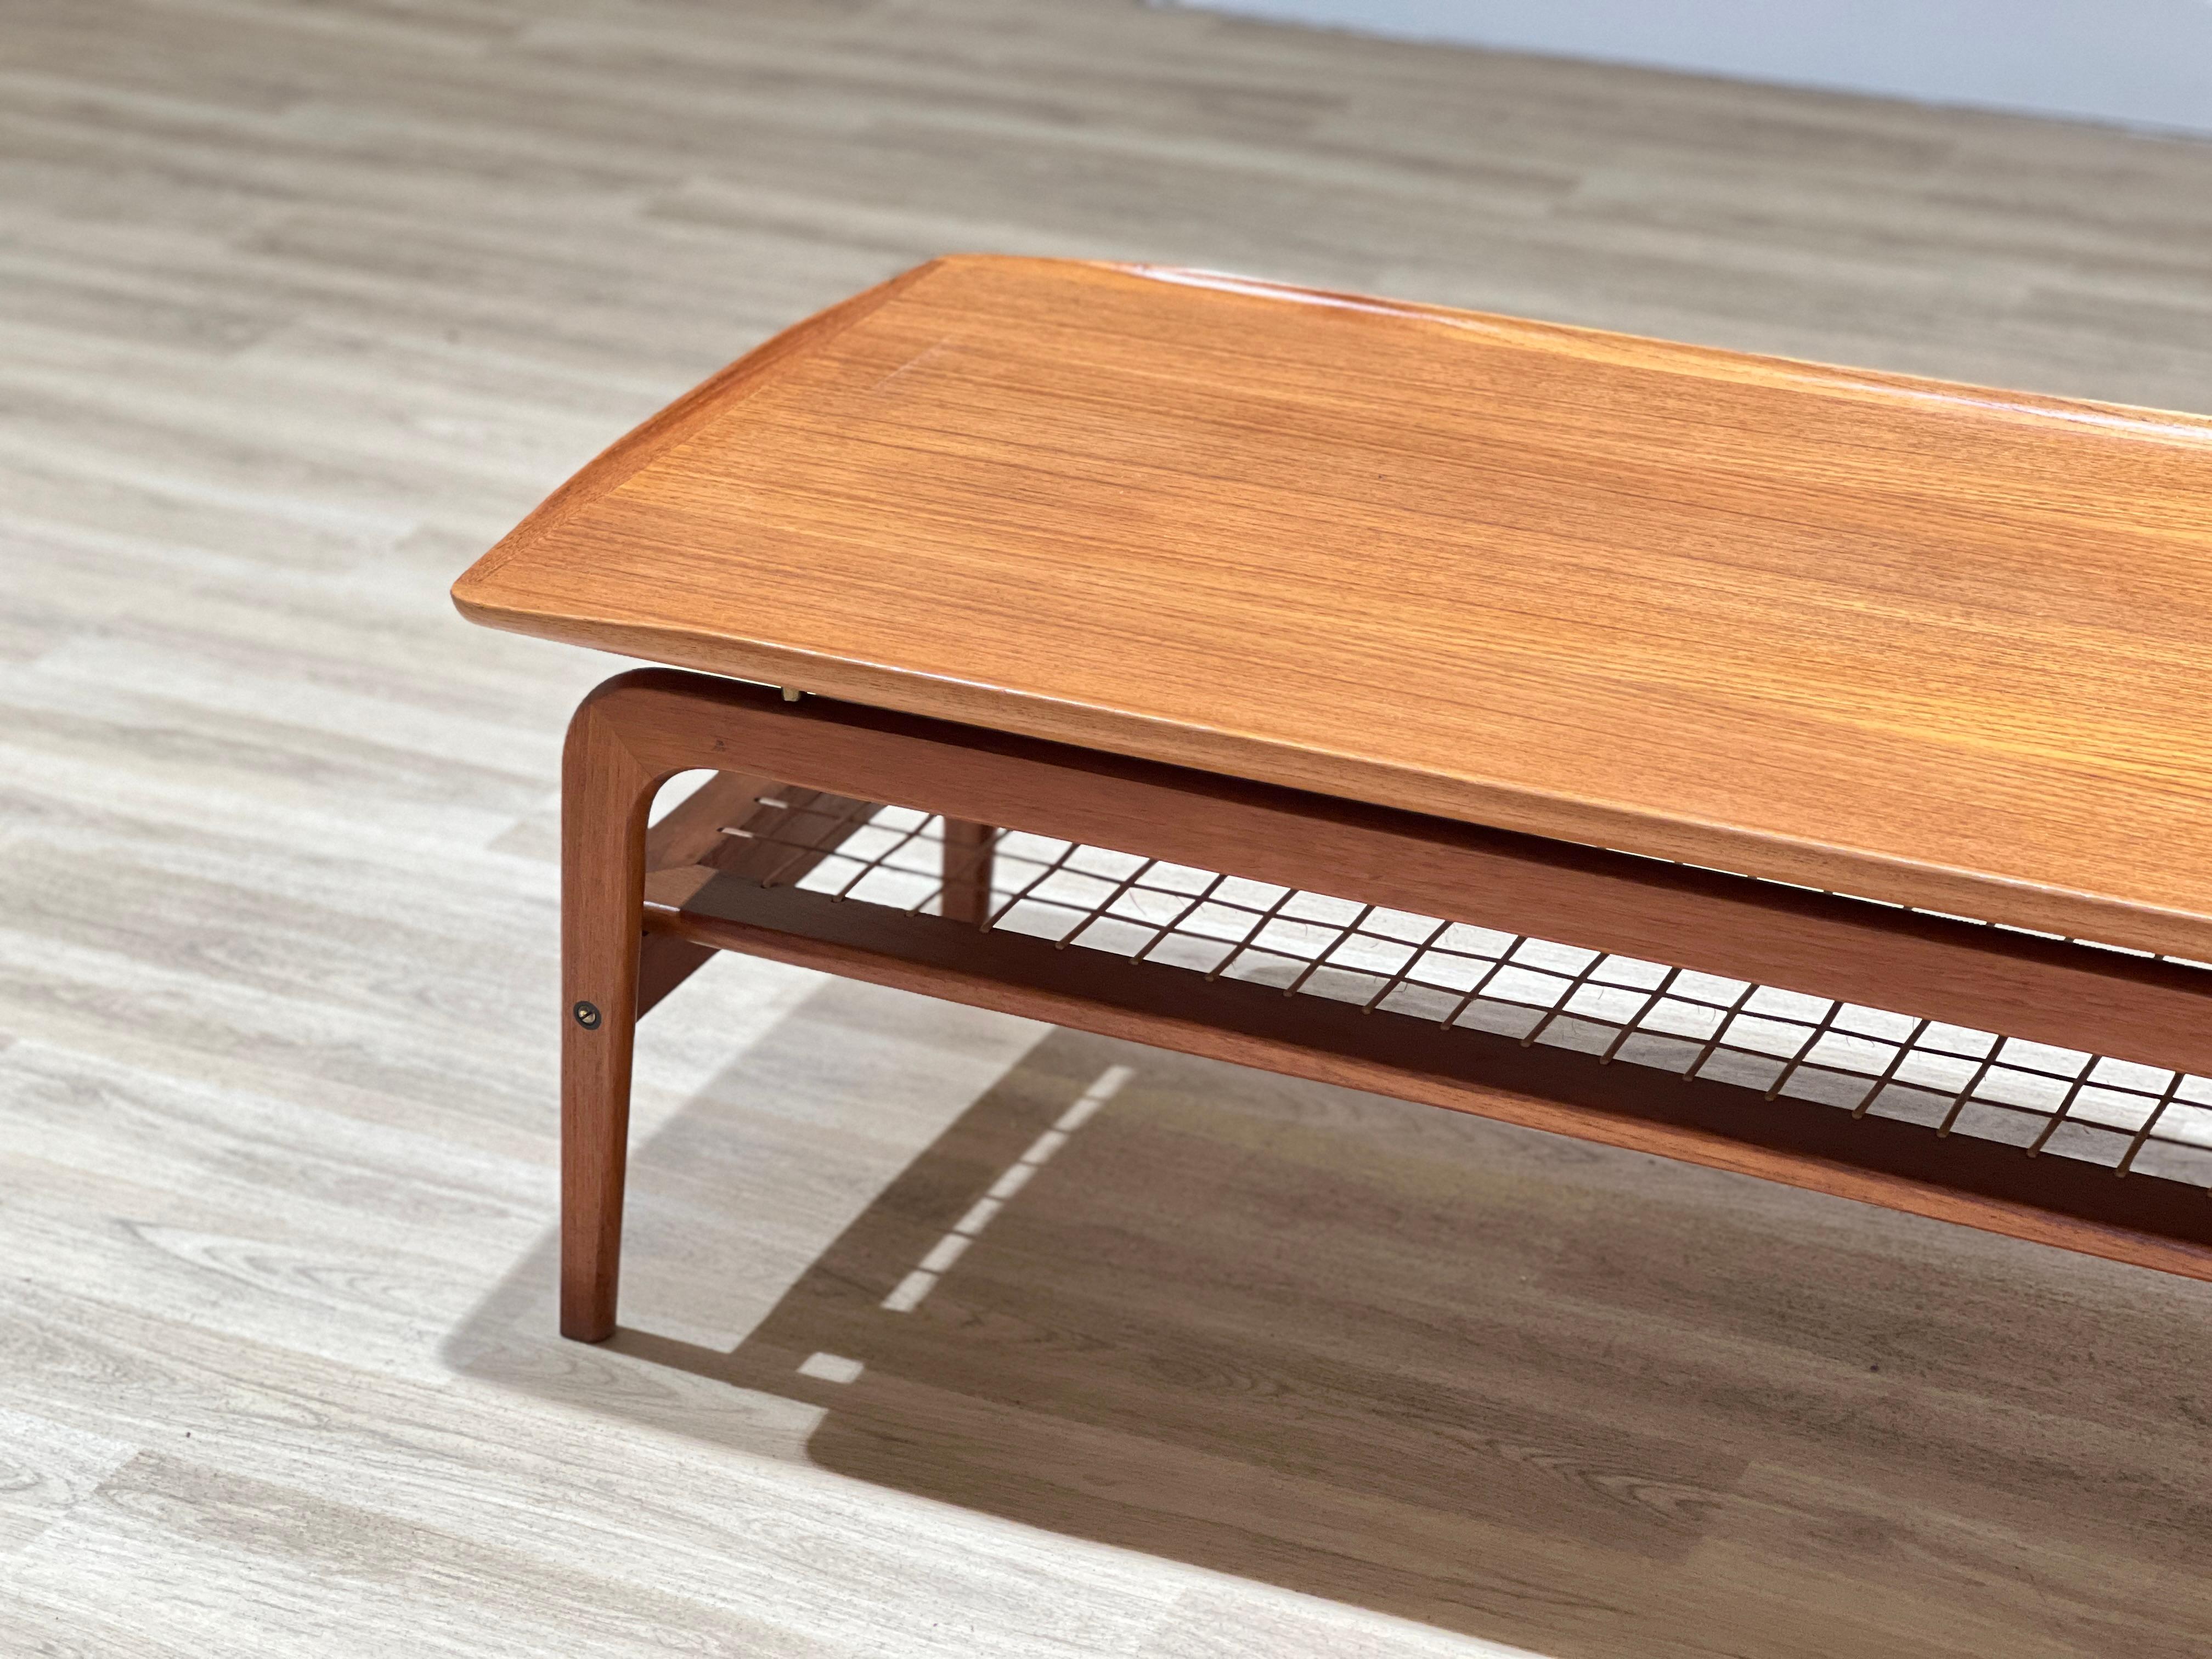 This beautifully designed coffee table by Arne Hovmand Olsen is a masterpiece of craftsmanship and elegance. Made in Denmark in the 1960s, it was created for the renowned cabinet maker Mogens Kold. The table features a stunning handcrafted rattan